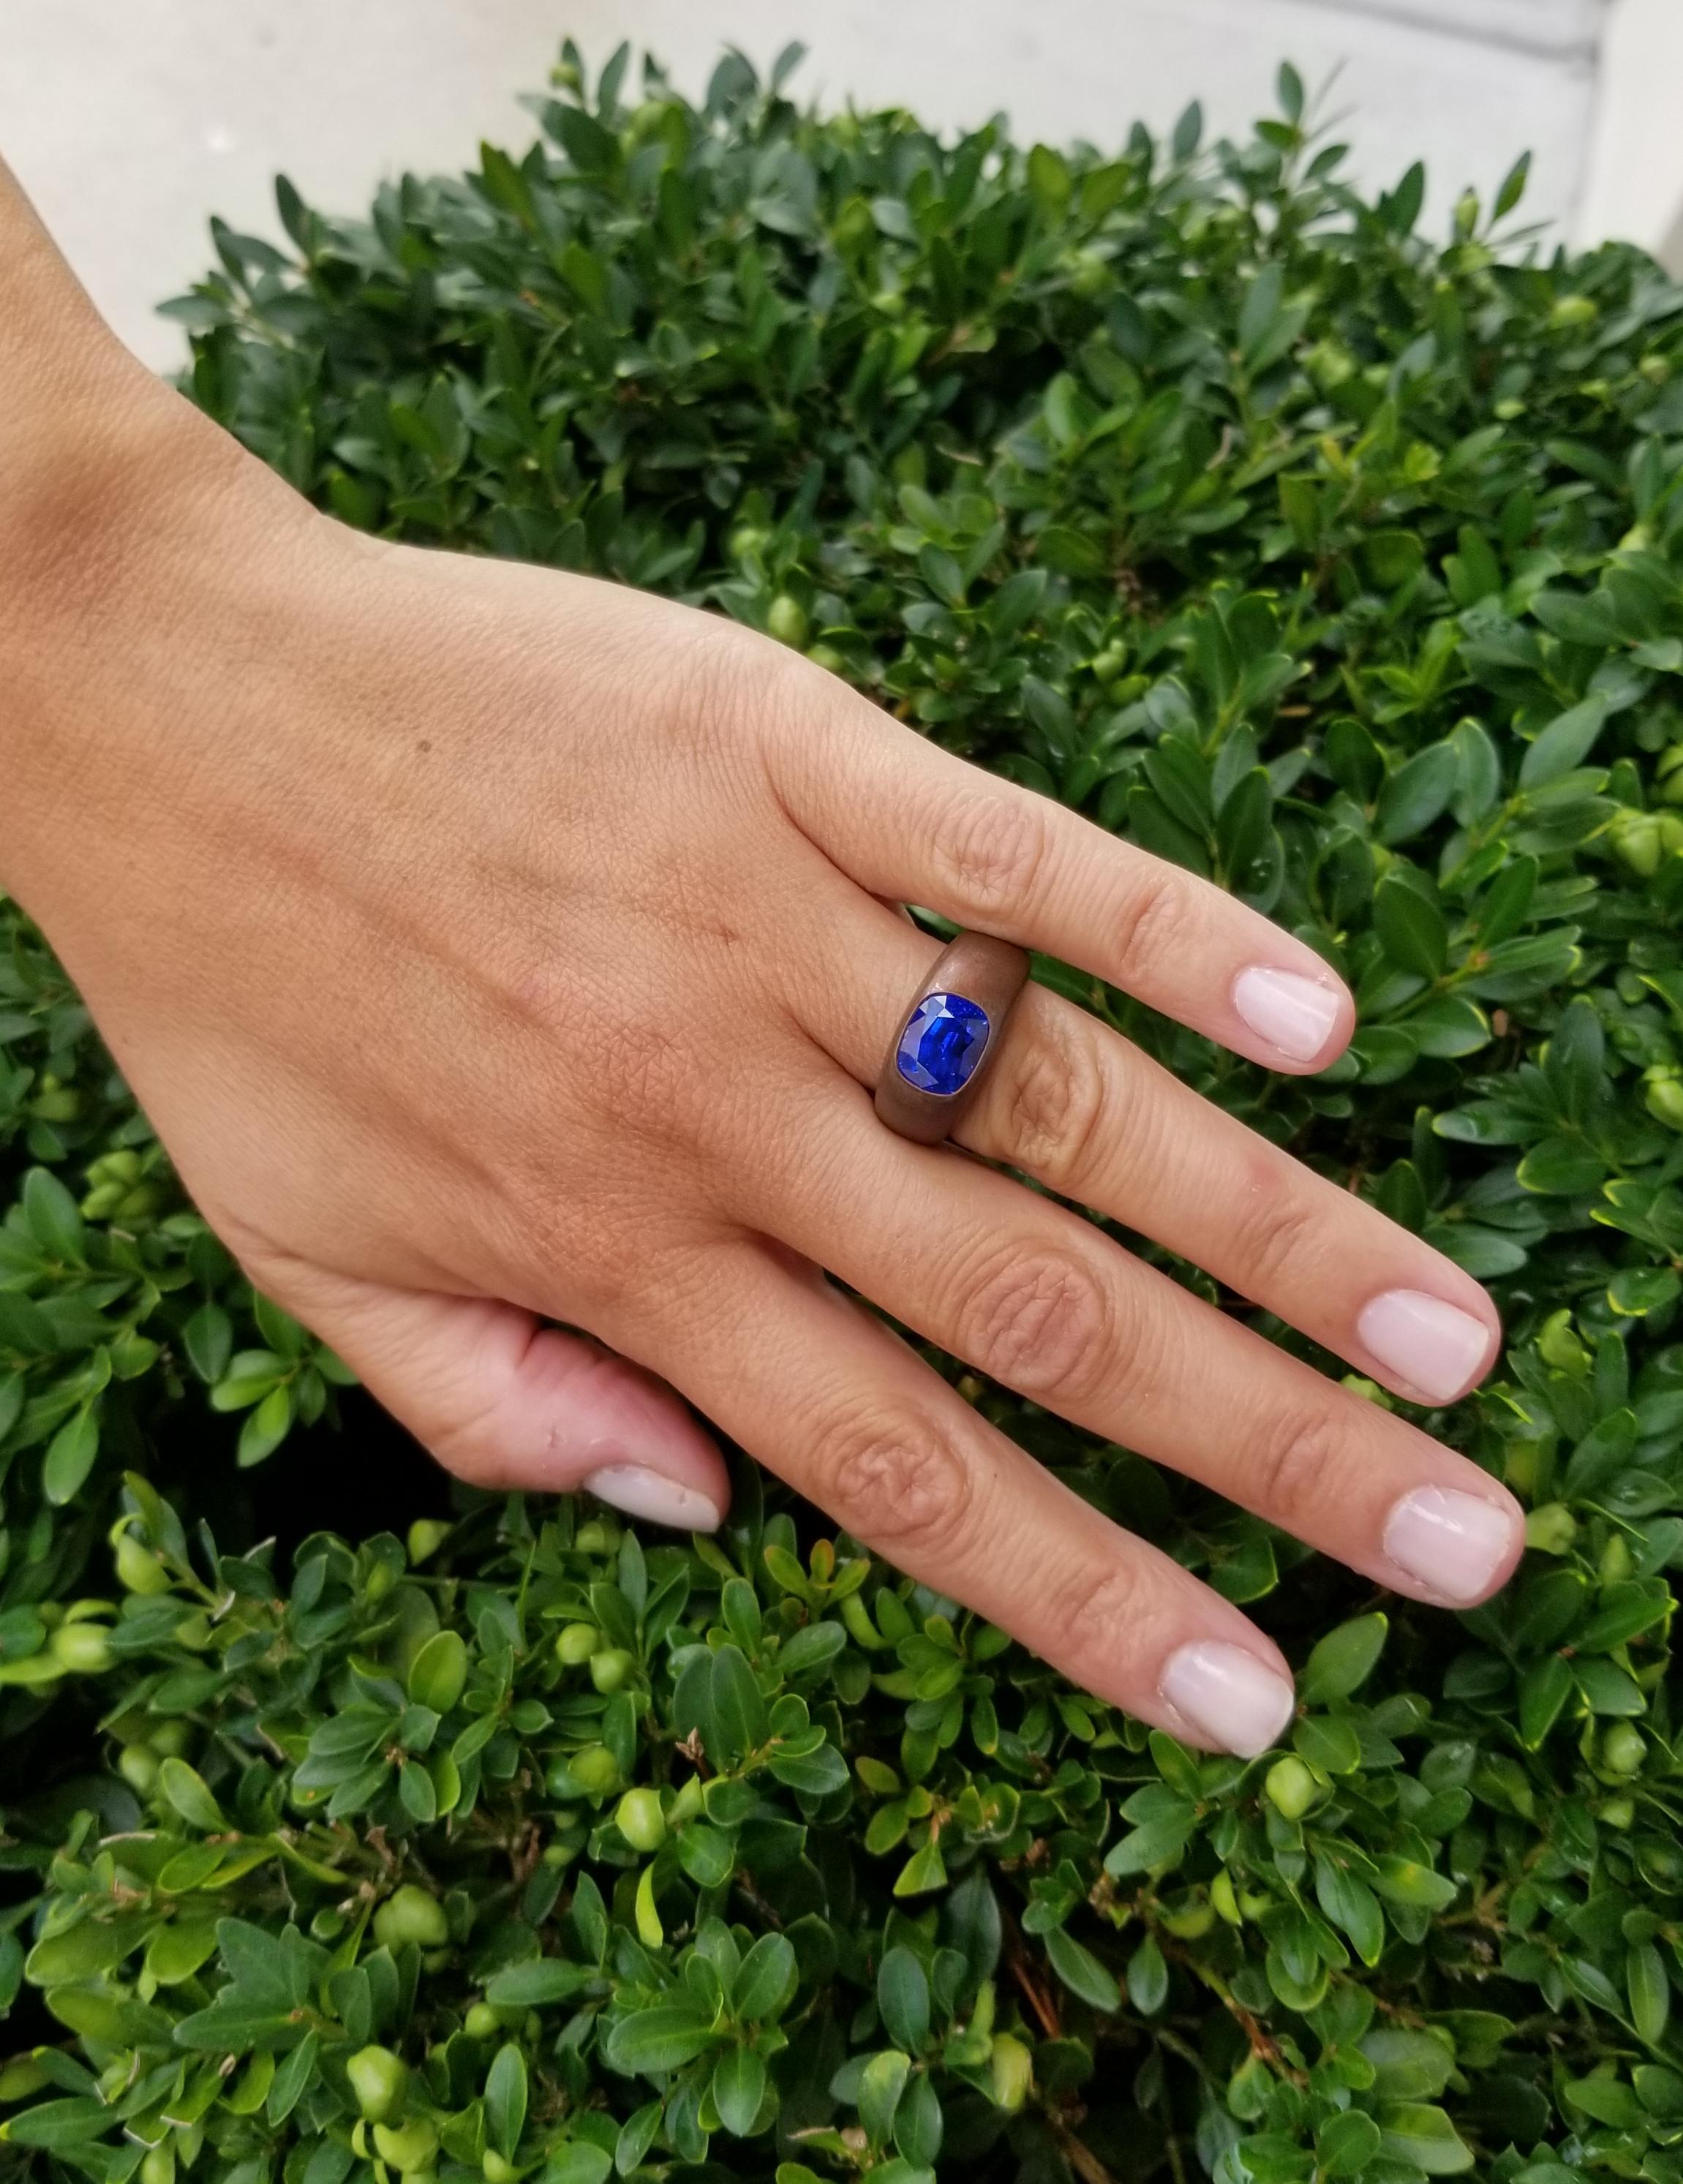 With a luscious combination of velvety blue sapphire and earthy brown copper, this vintage Hemmerle gypsy ring is the perfect marriage of contrasting warm and cool hues.  The antique cushion cut 4.20 carat no heat Ceylon sapphire is burnished set in